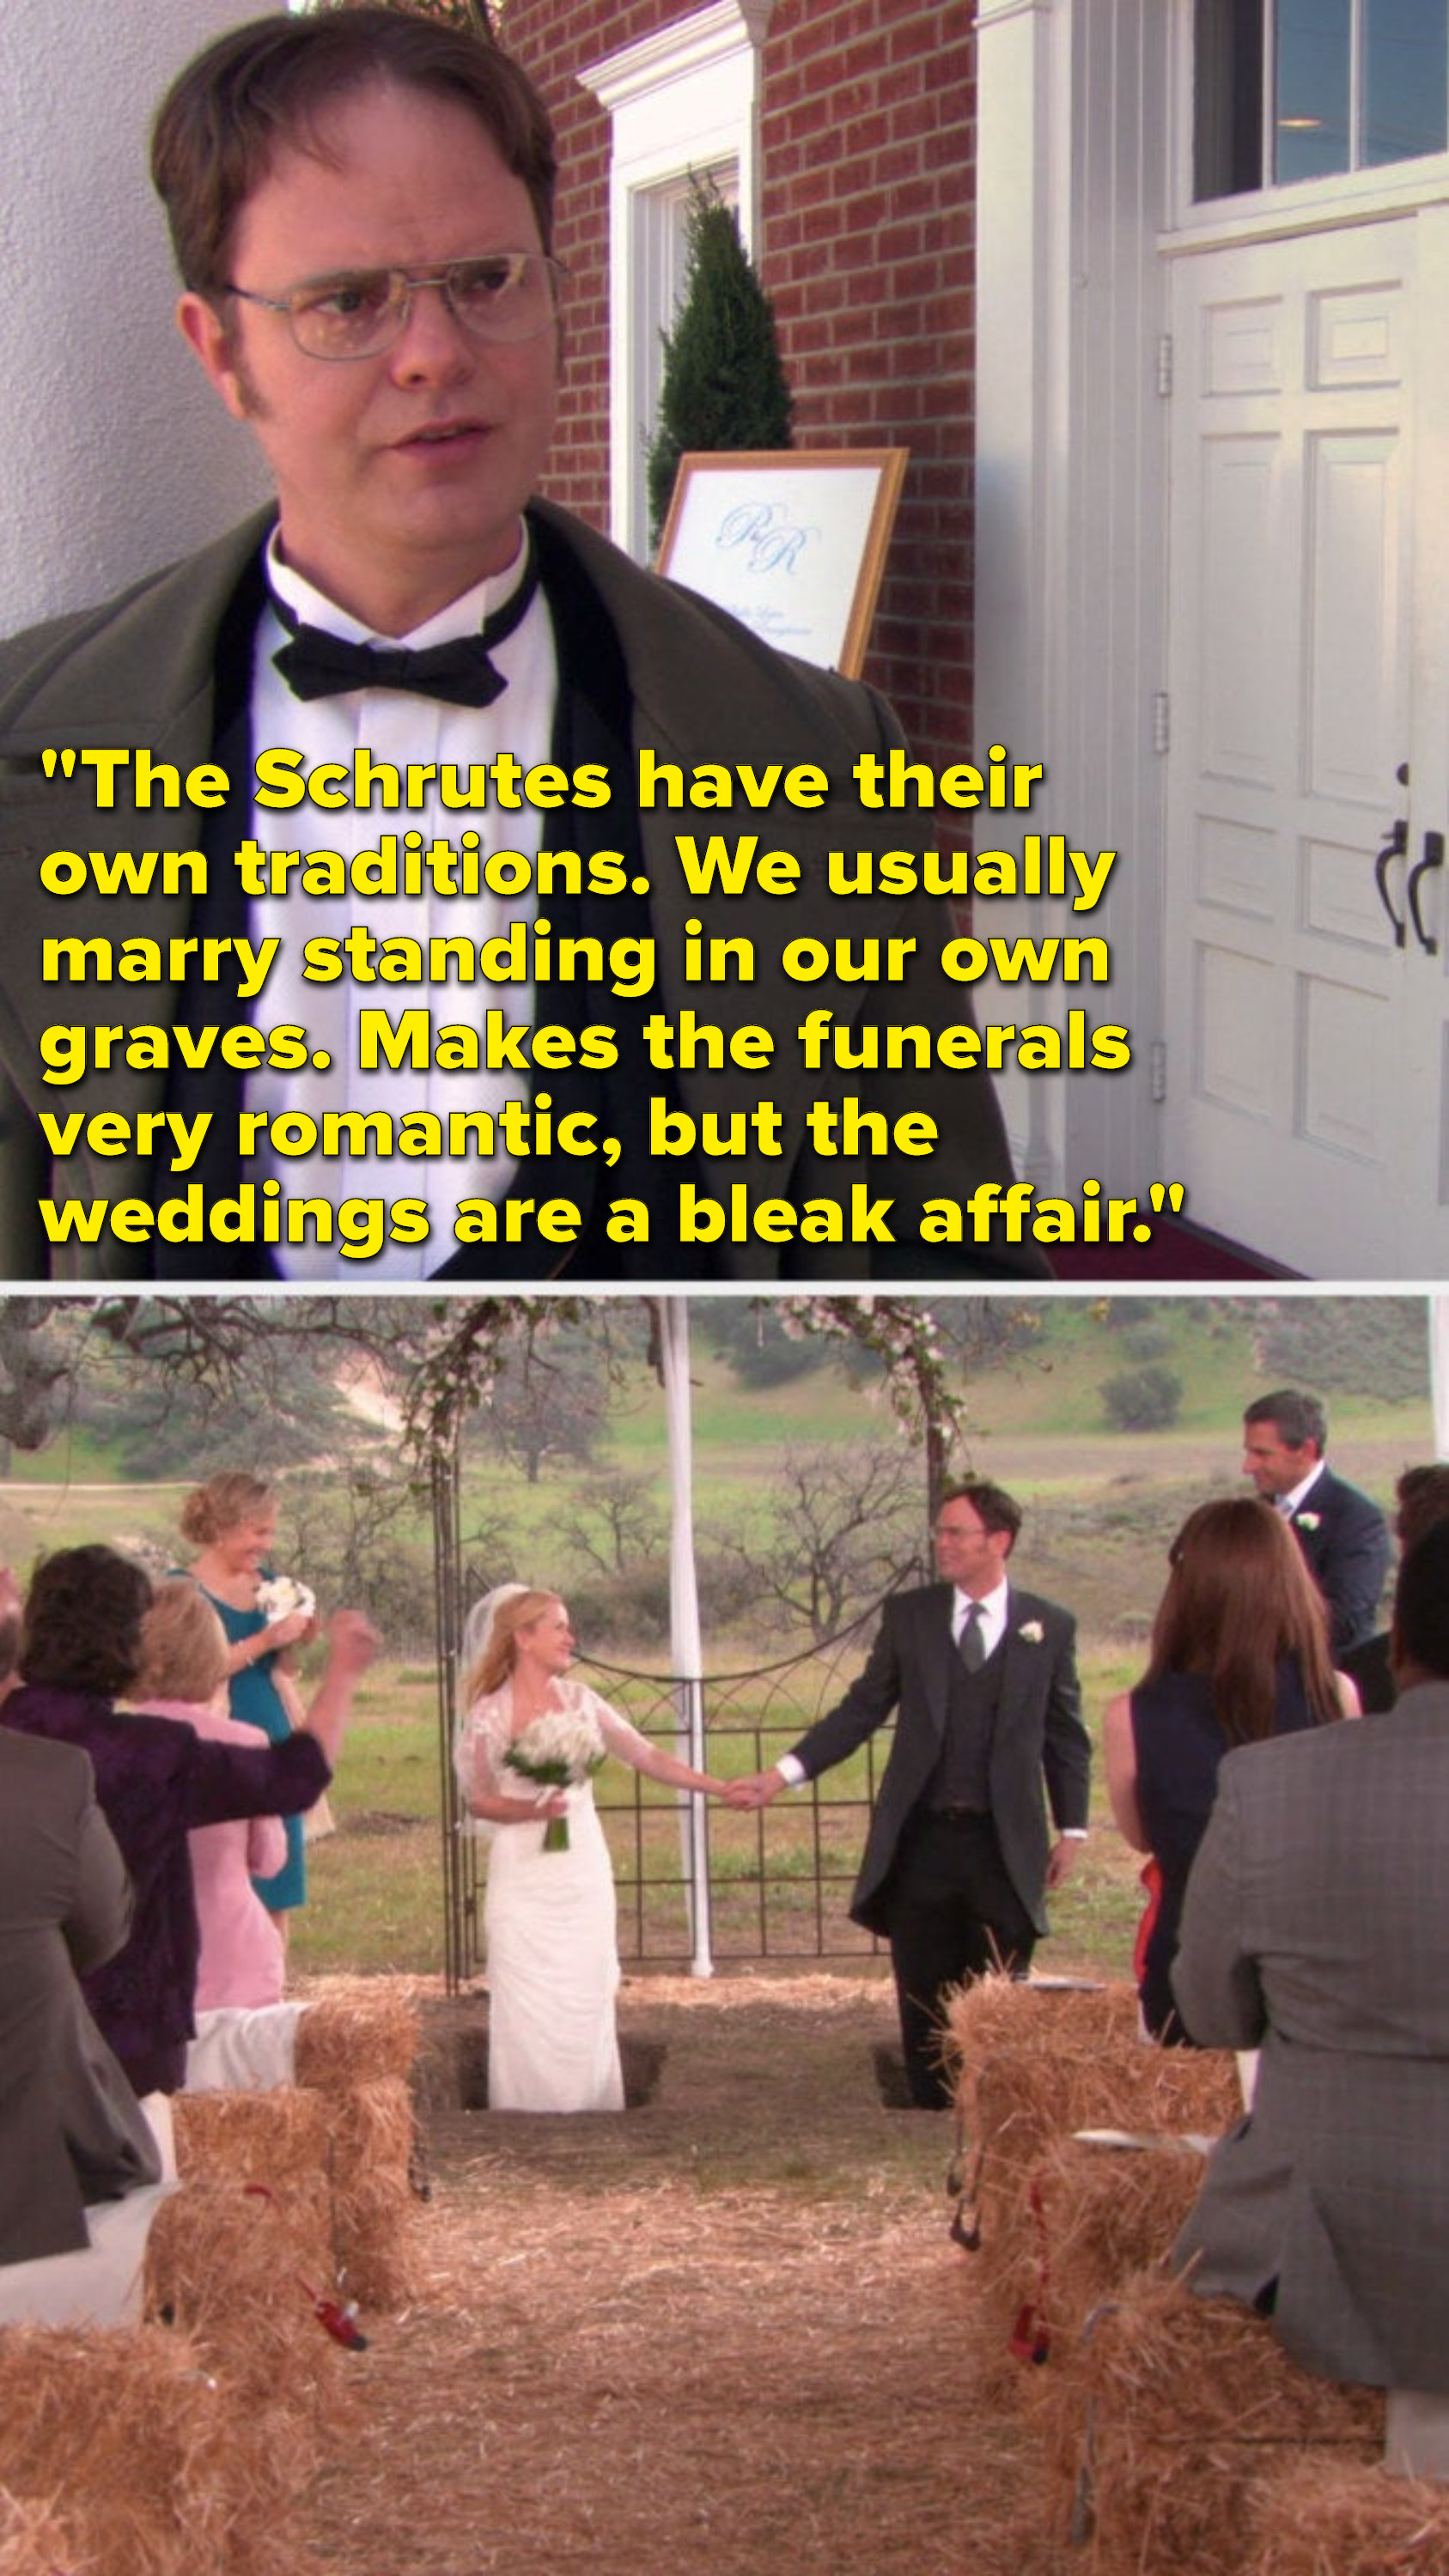 Dwight says, &quot;The Schrutes have their own traditions, we usually marry standing in our own graves, makes the funerals very romantic, but the weddings are a bleak affair,&quot; and then we see that&#x27;s how Angela and Dwight get married